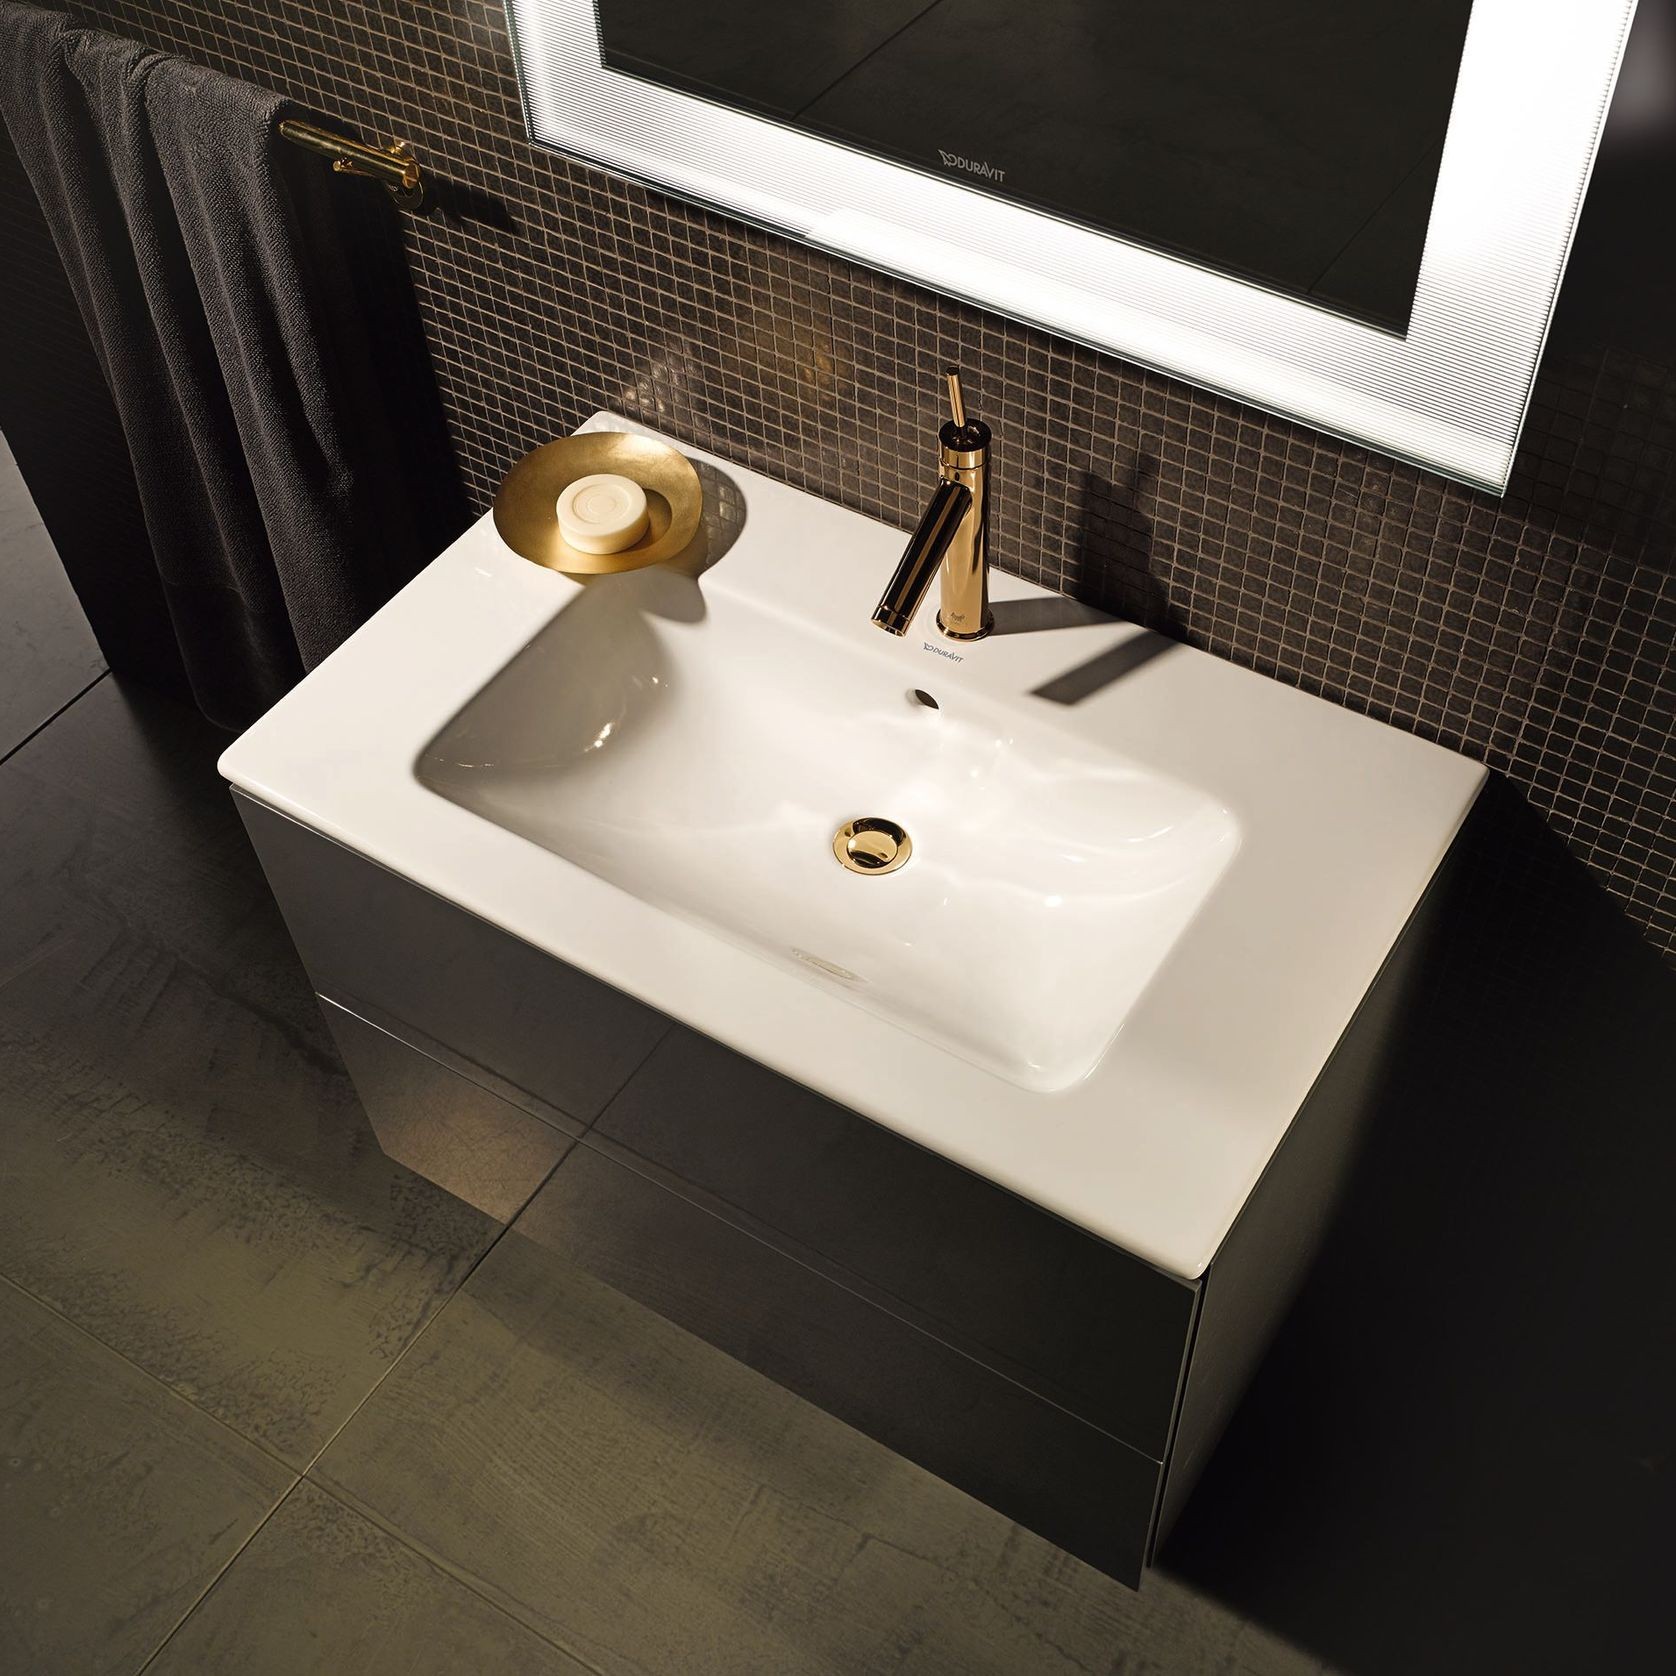 ME by Starck Basin by Duravit gallery detail image